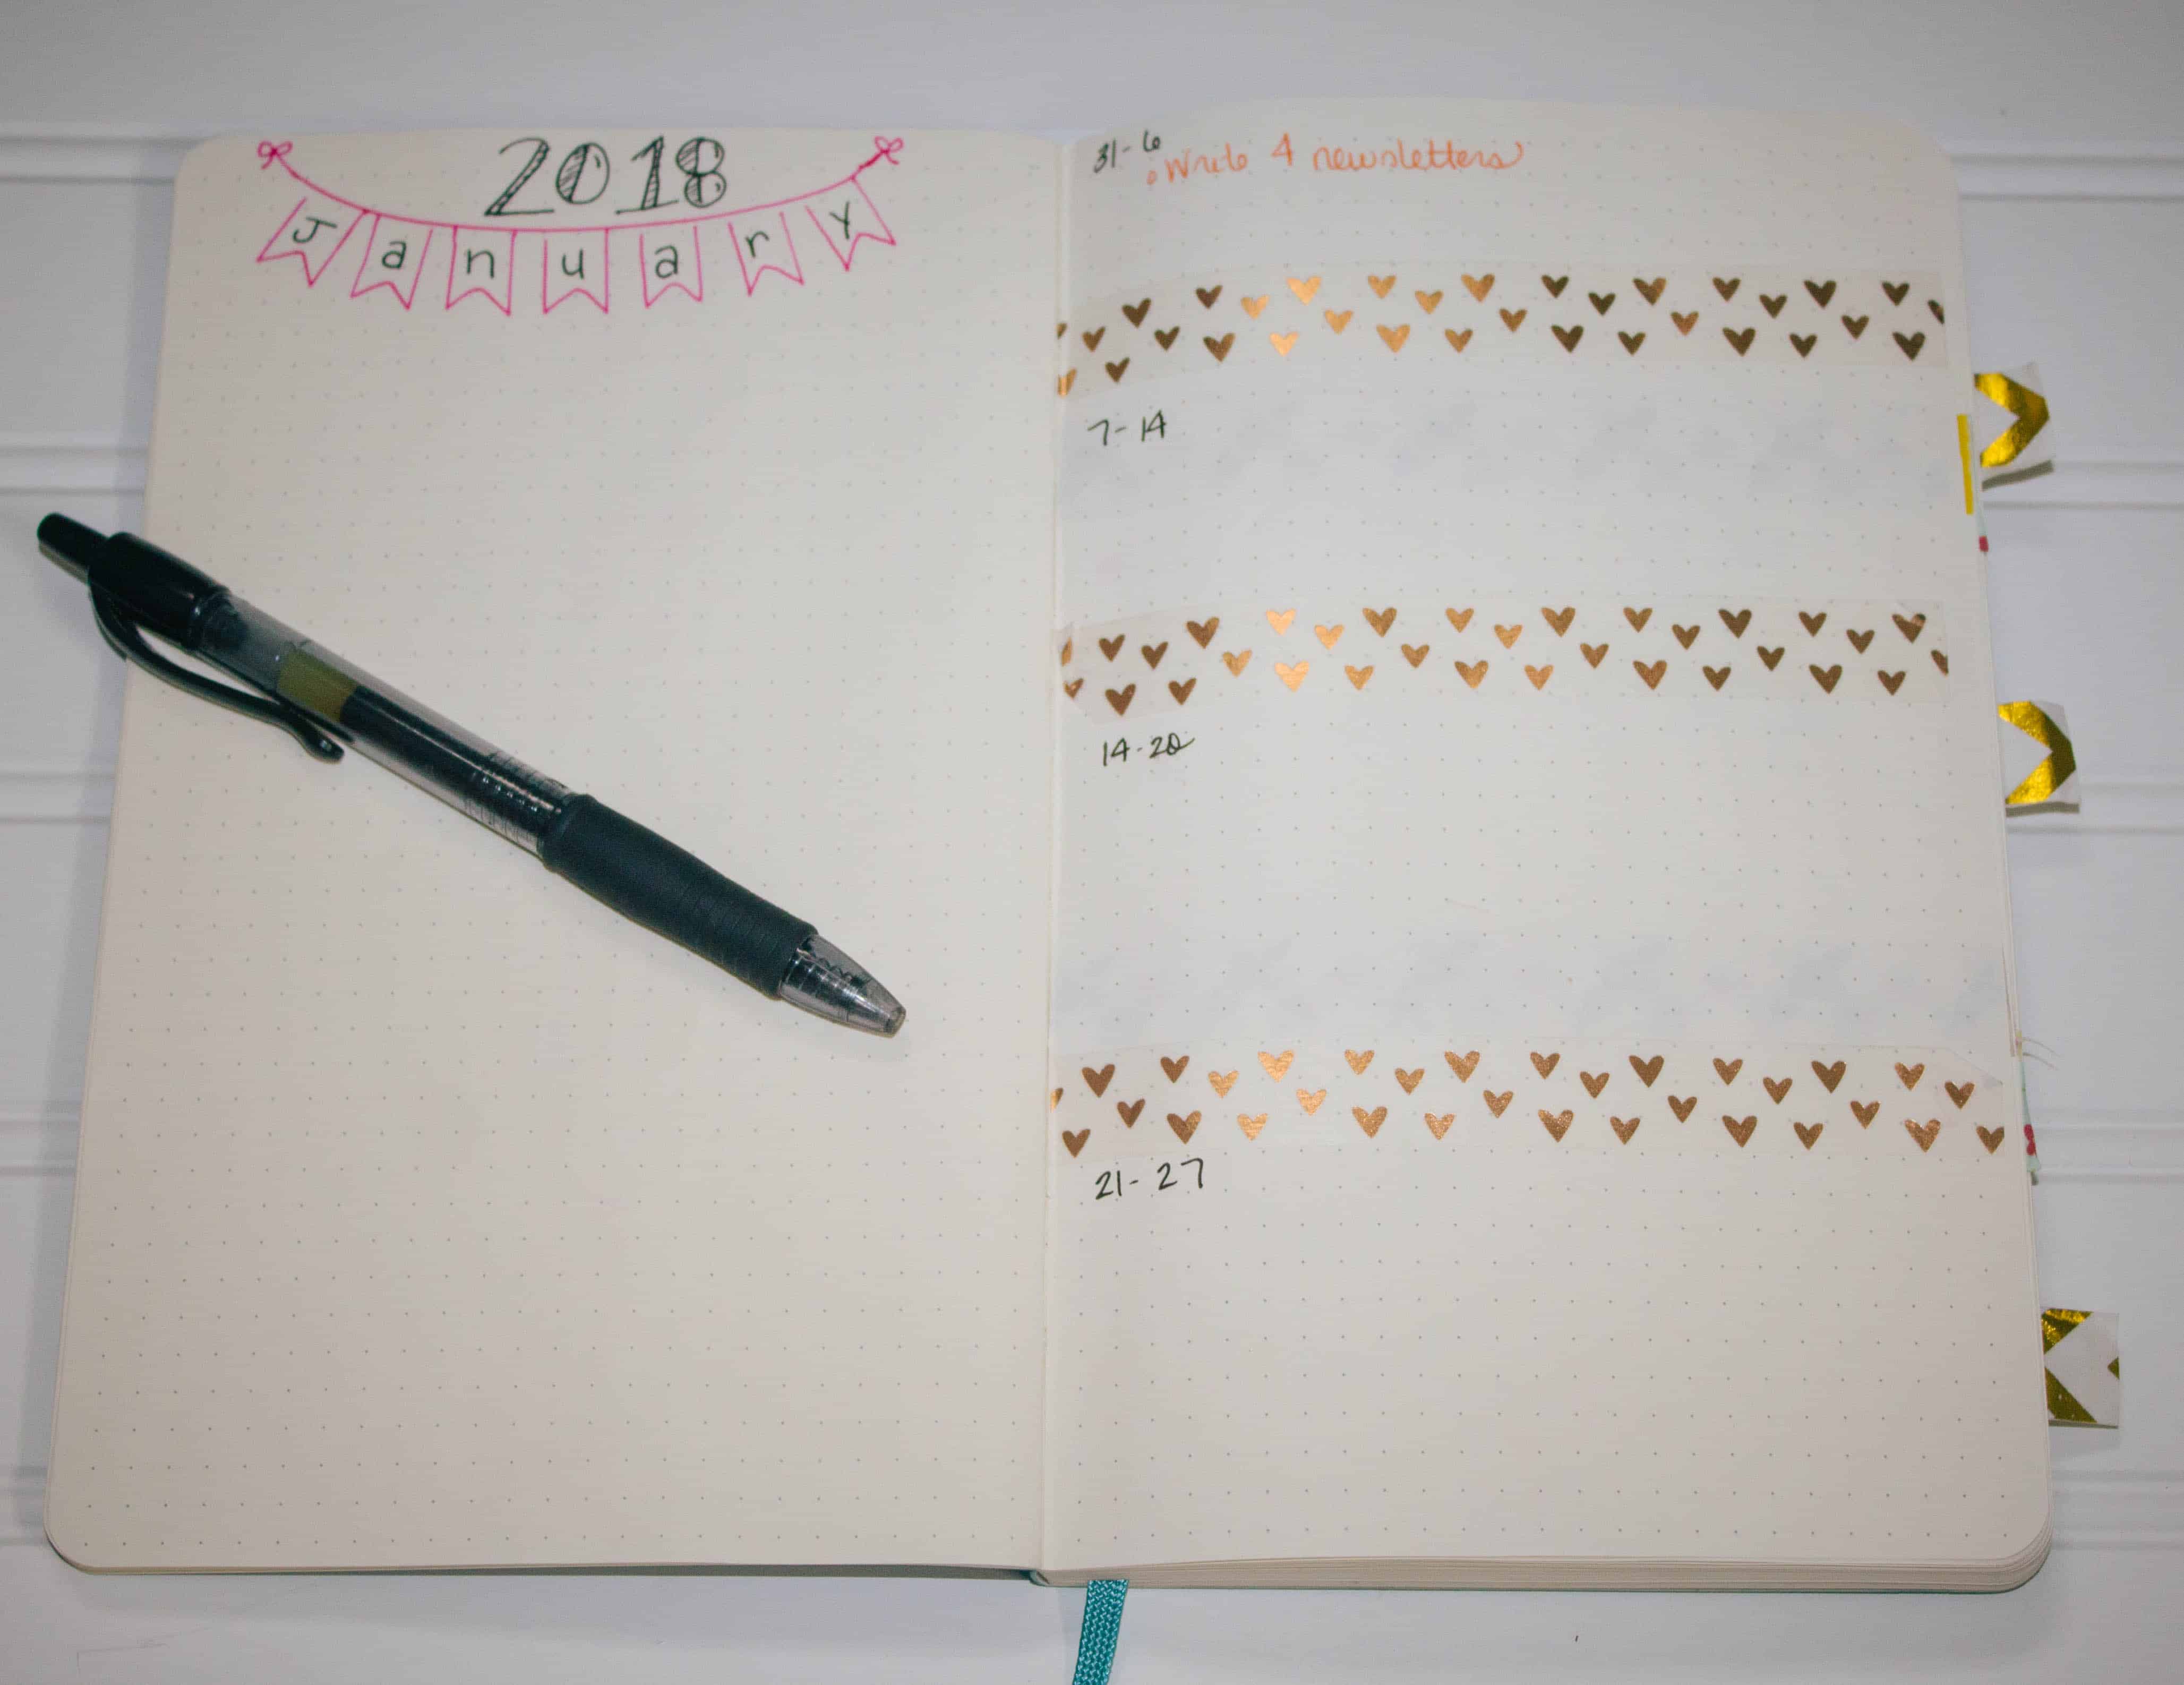 Loving this REAL bullet journal for moms. No need to worry about messing it up. It's flexibility and personalization makes it perfect for busy moms.